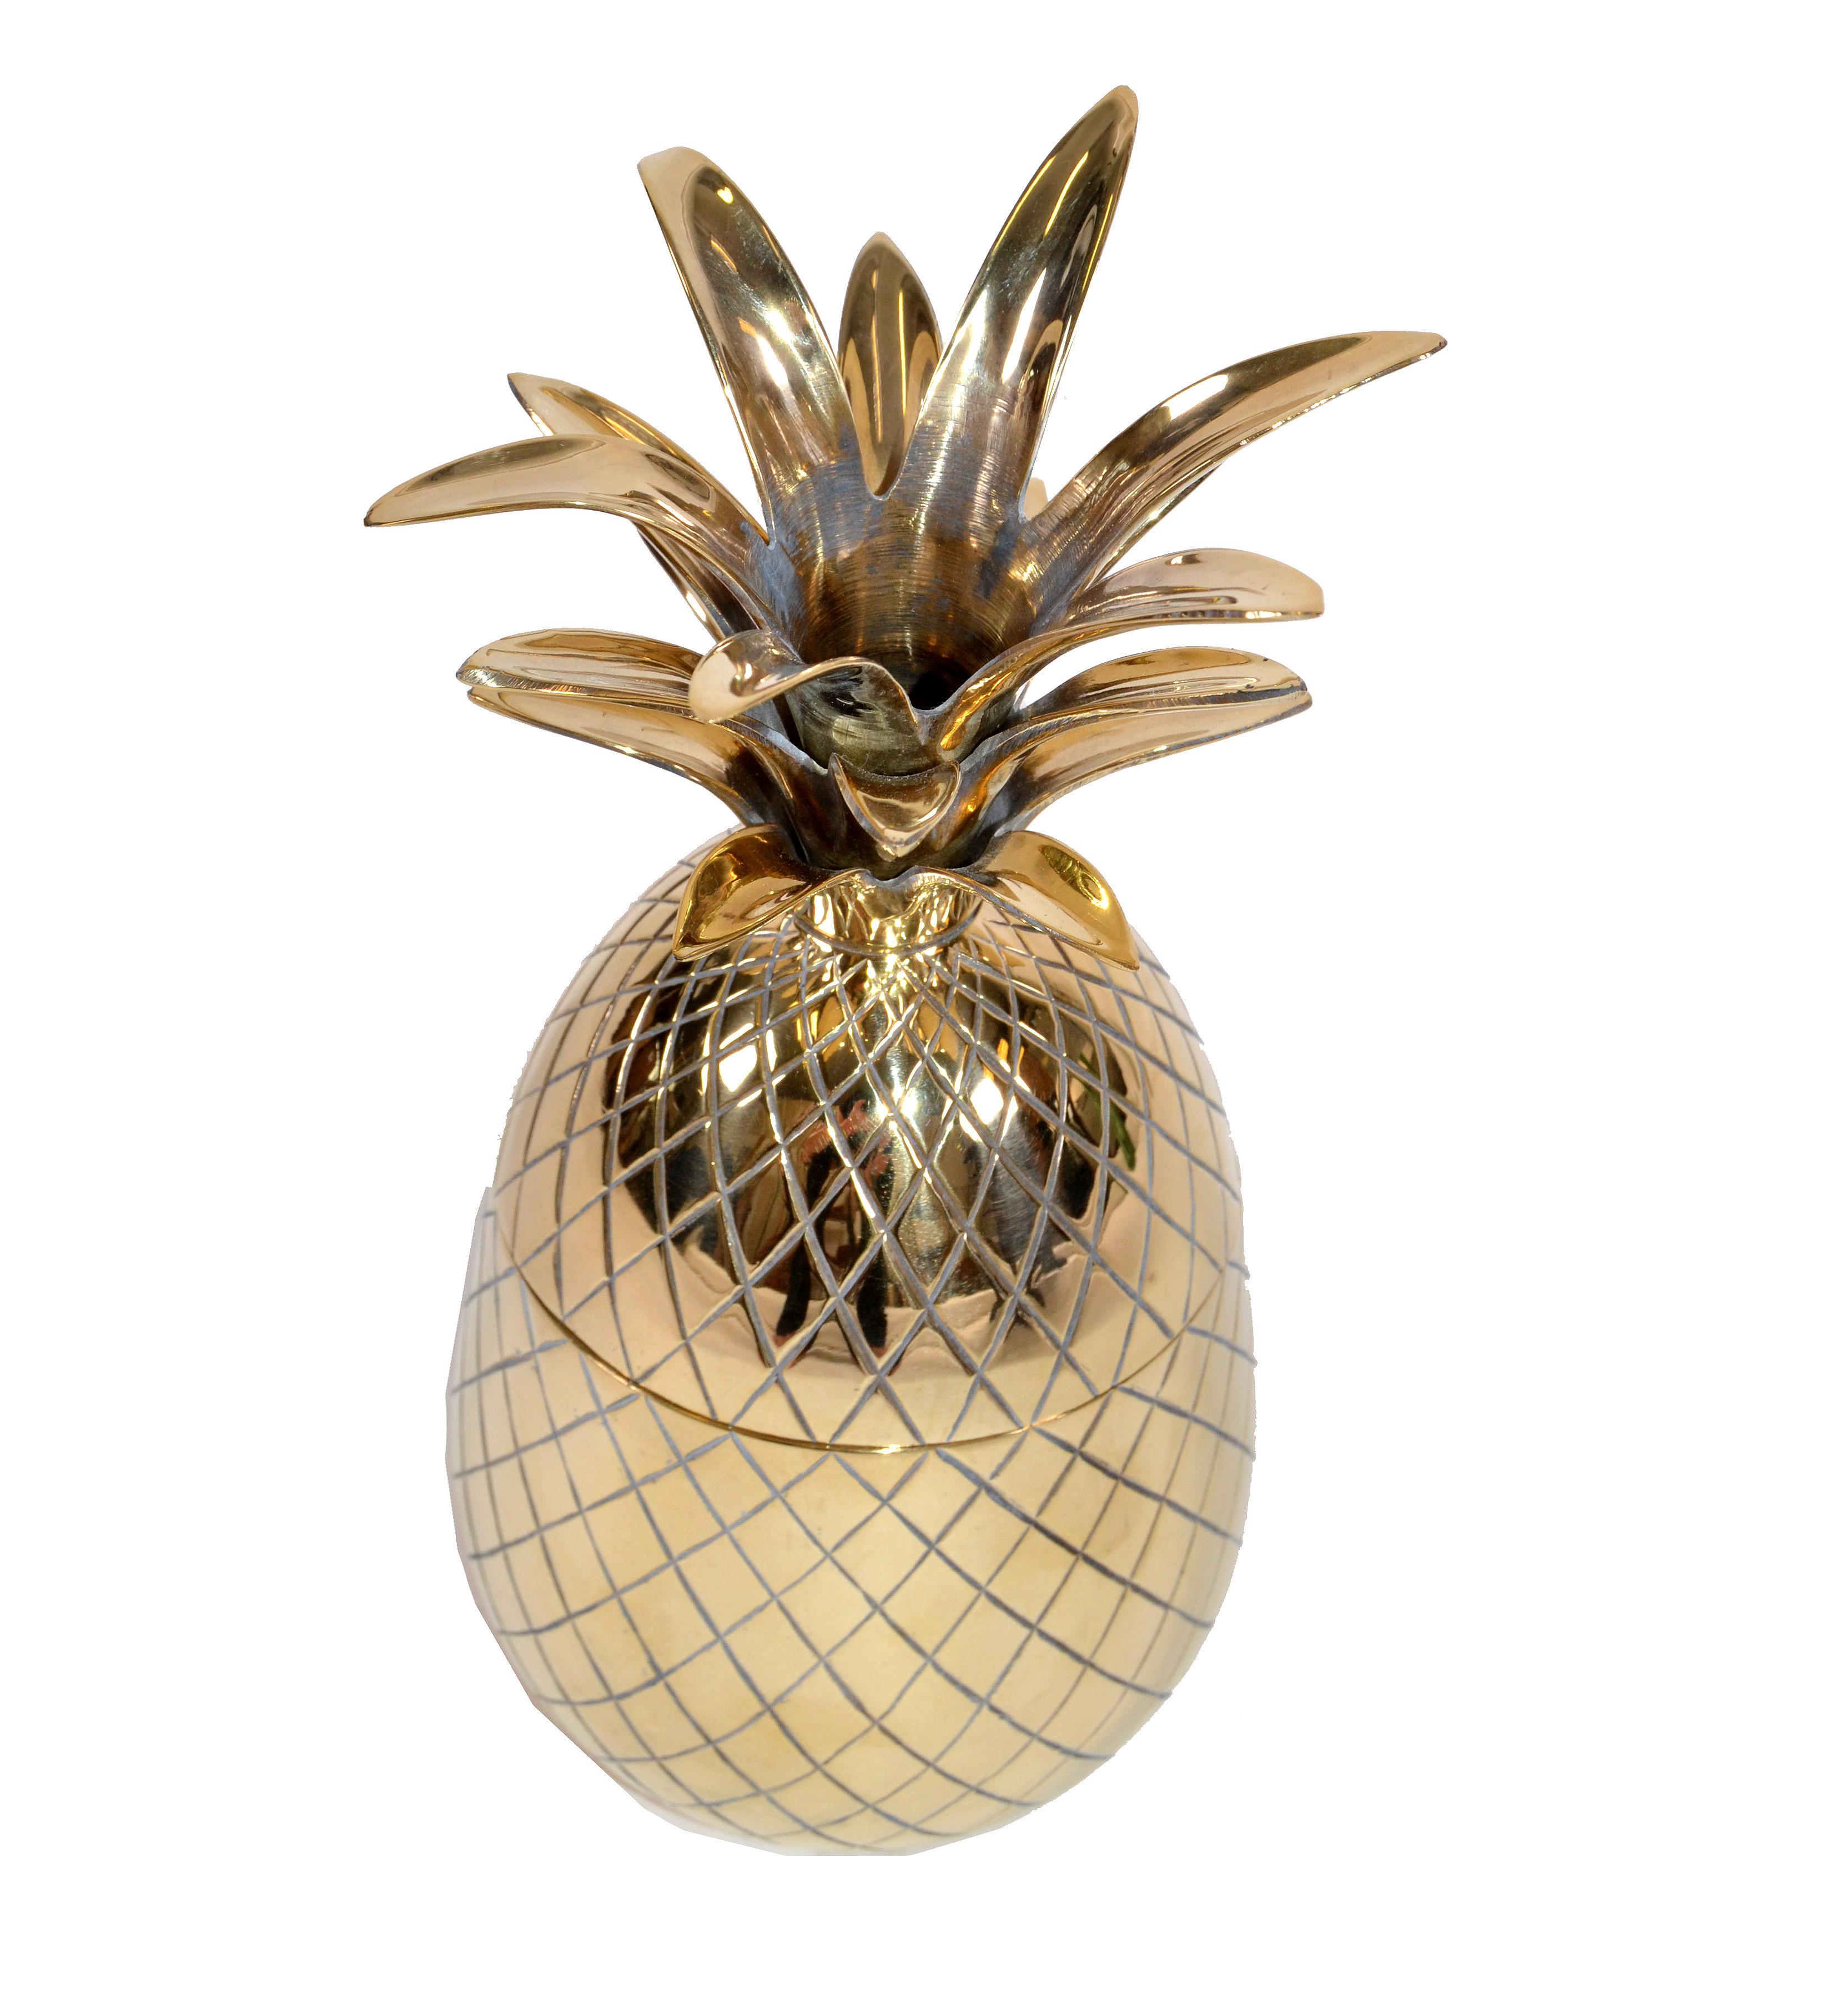 Decorative brass pineapple Pina Colada cup, jar with lid from the 1970s.
Recently polished and professional cleaned.
Mid-Century Modern collectible Barware item and Fine Art Sculpture.